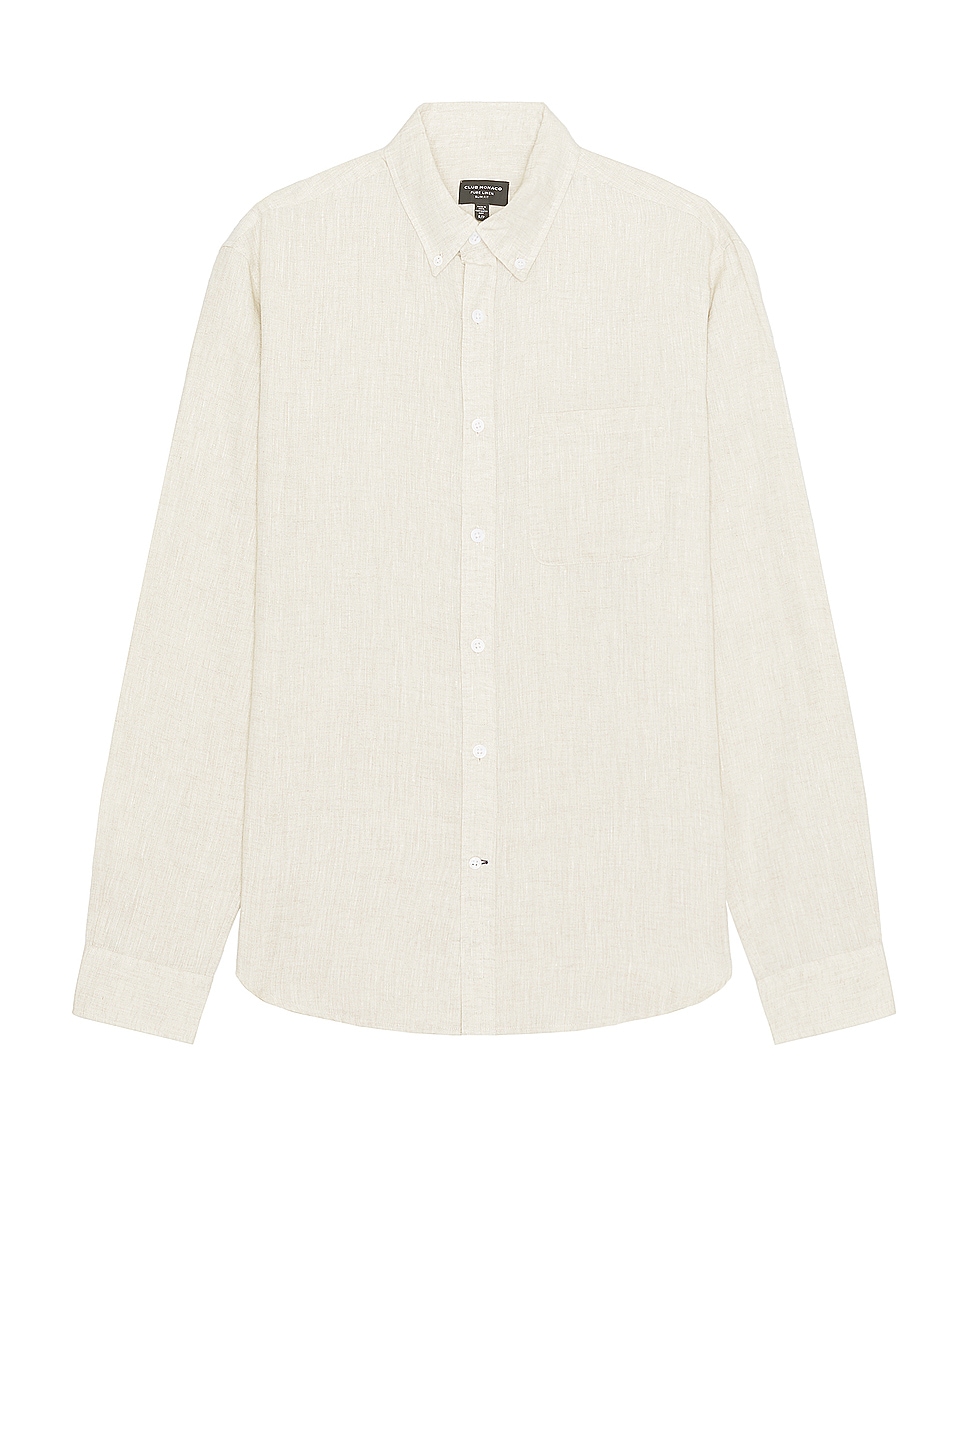 Image 1 of Club Monaco Long Sleeve Solid Linen Shirt in Natural